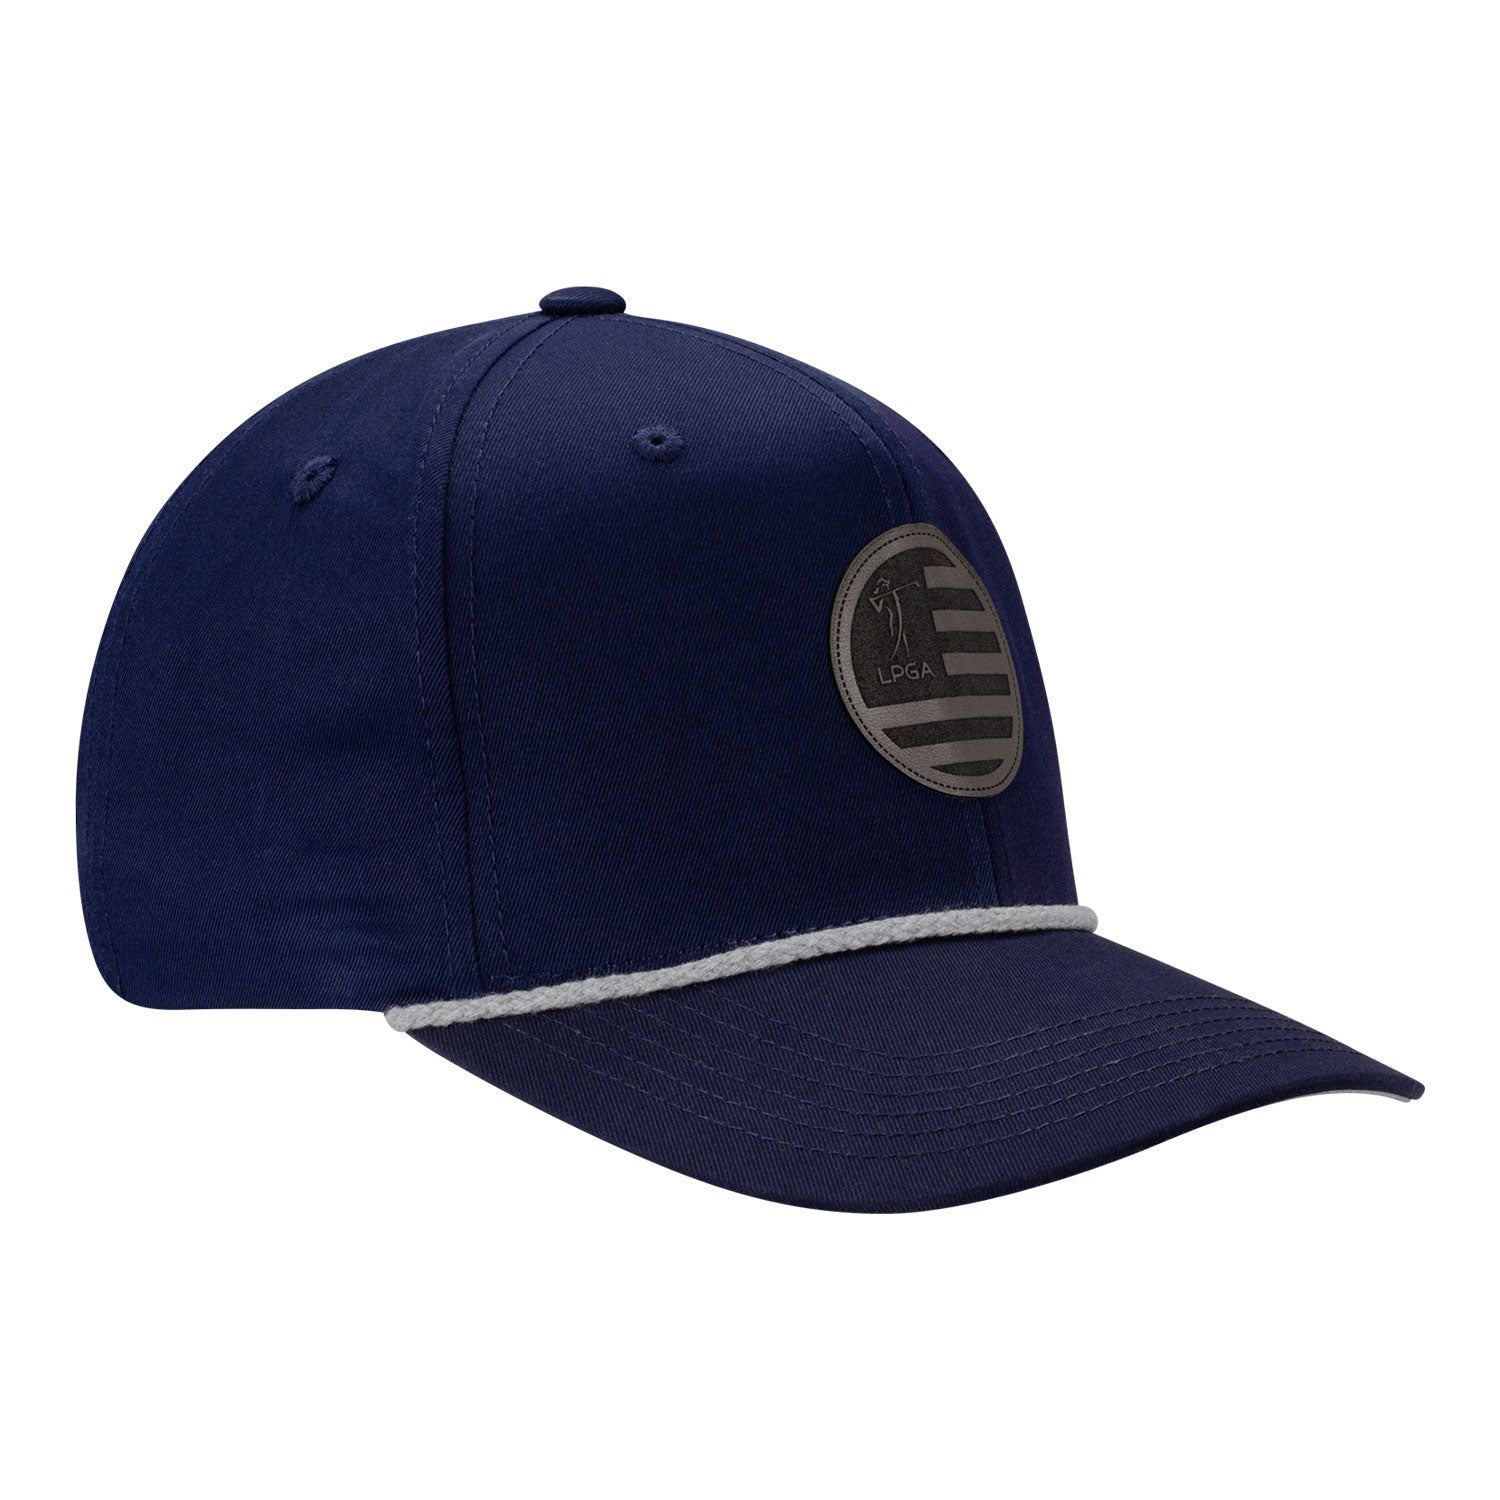 Imperial  LPGA Men's Rope Hat with Suede Patch in Dark Blue - Angled Right Side View